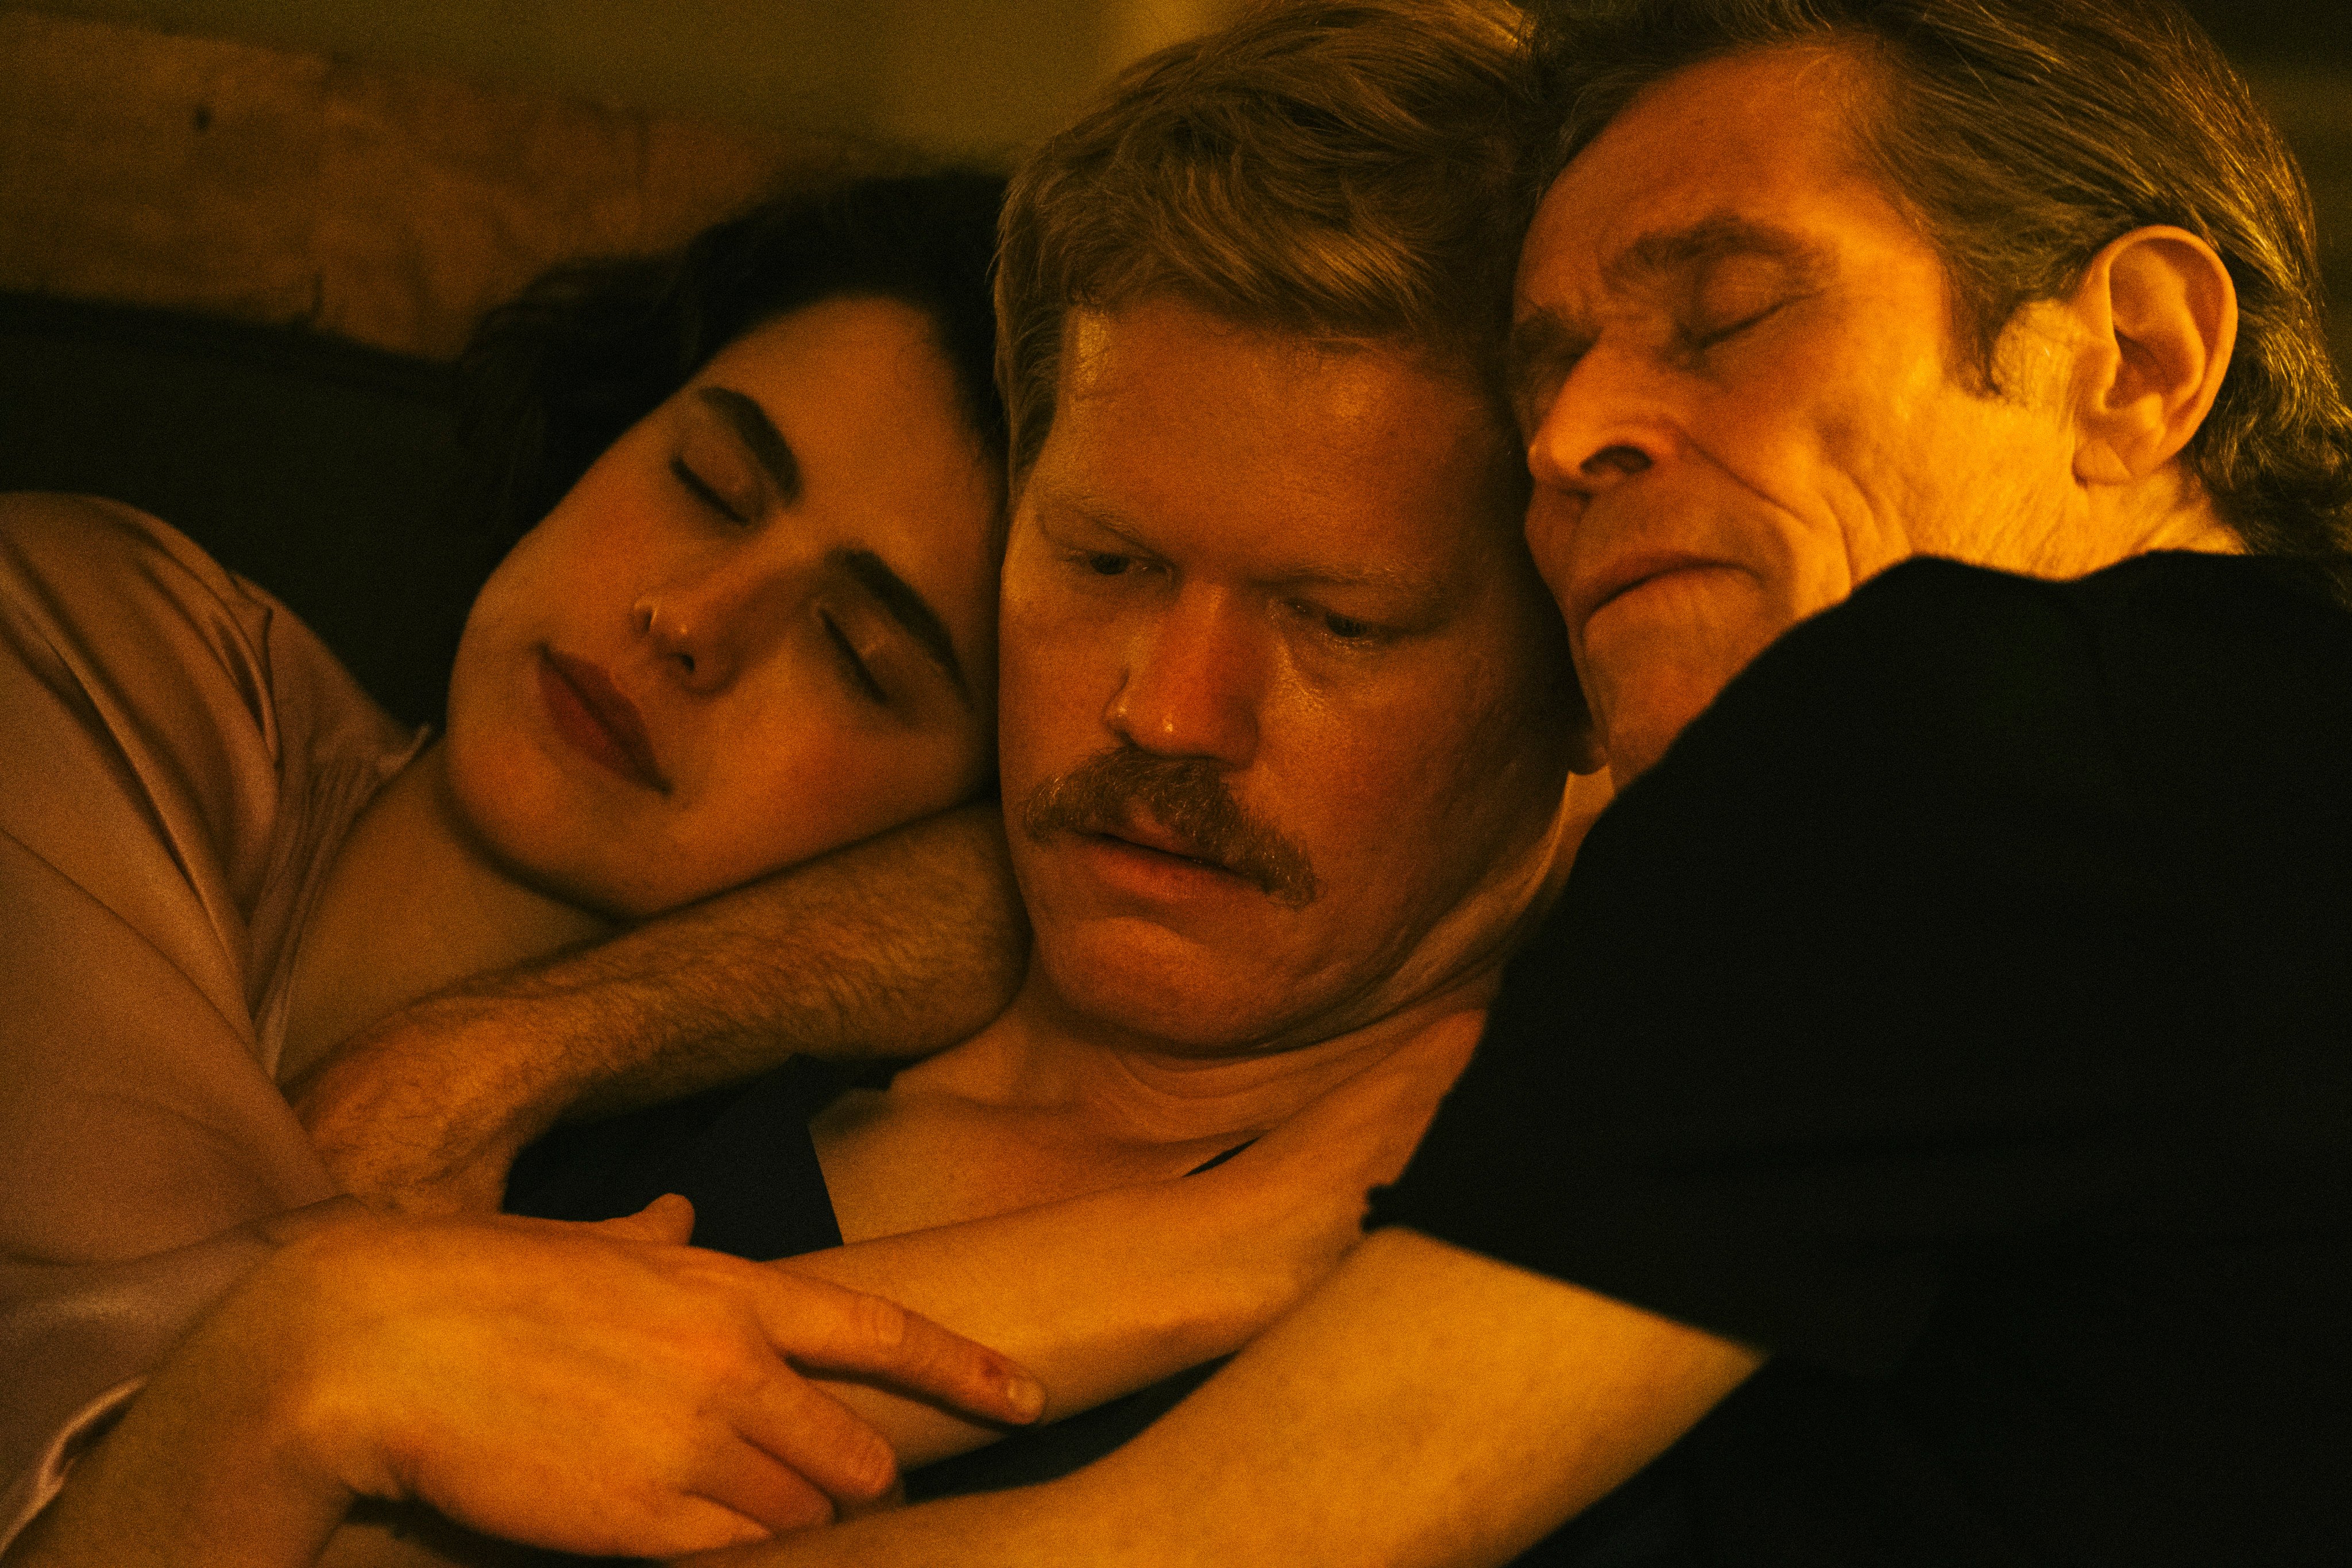 (From left) Margaret Qualley, Jesse Plemons and Willem Dafoe in a still from Kinds of Kindness.